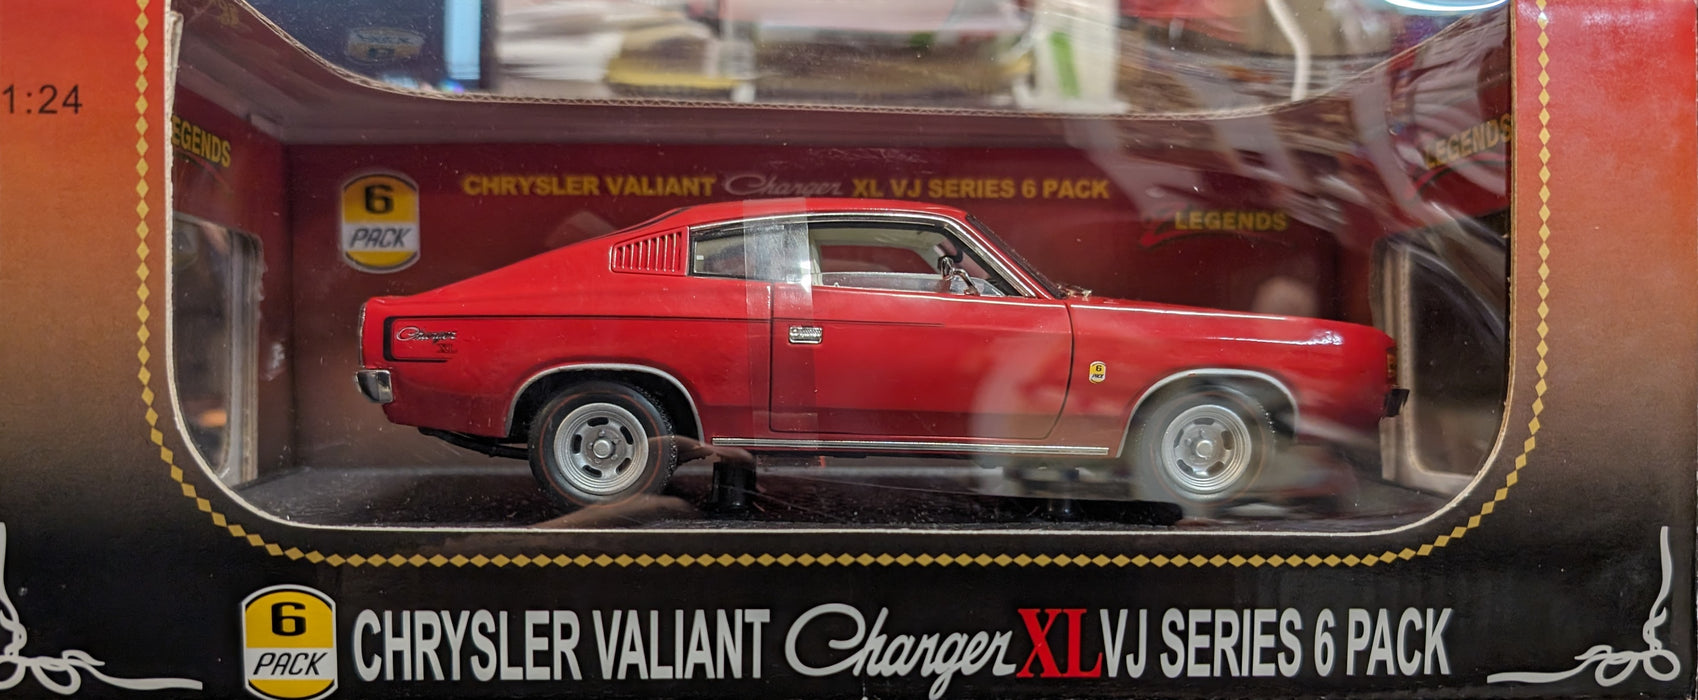 Chrysler Valiant Charger XL VJ Series 6 Pack, Vintage Red, 1:24 Diecast Vehicle